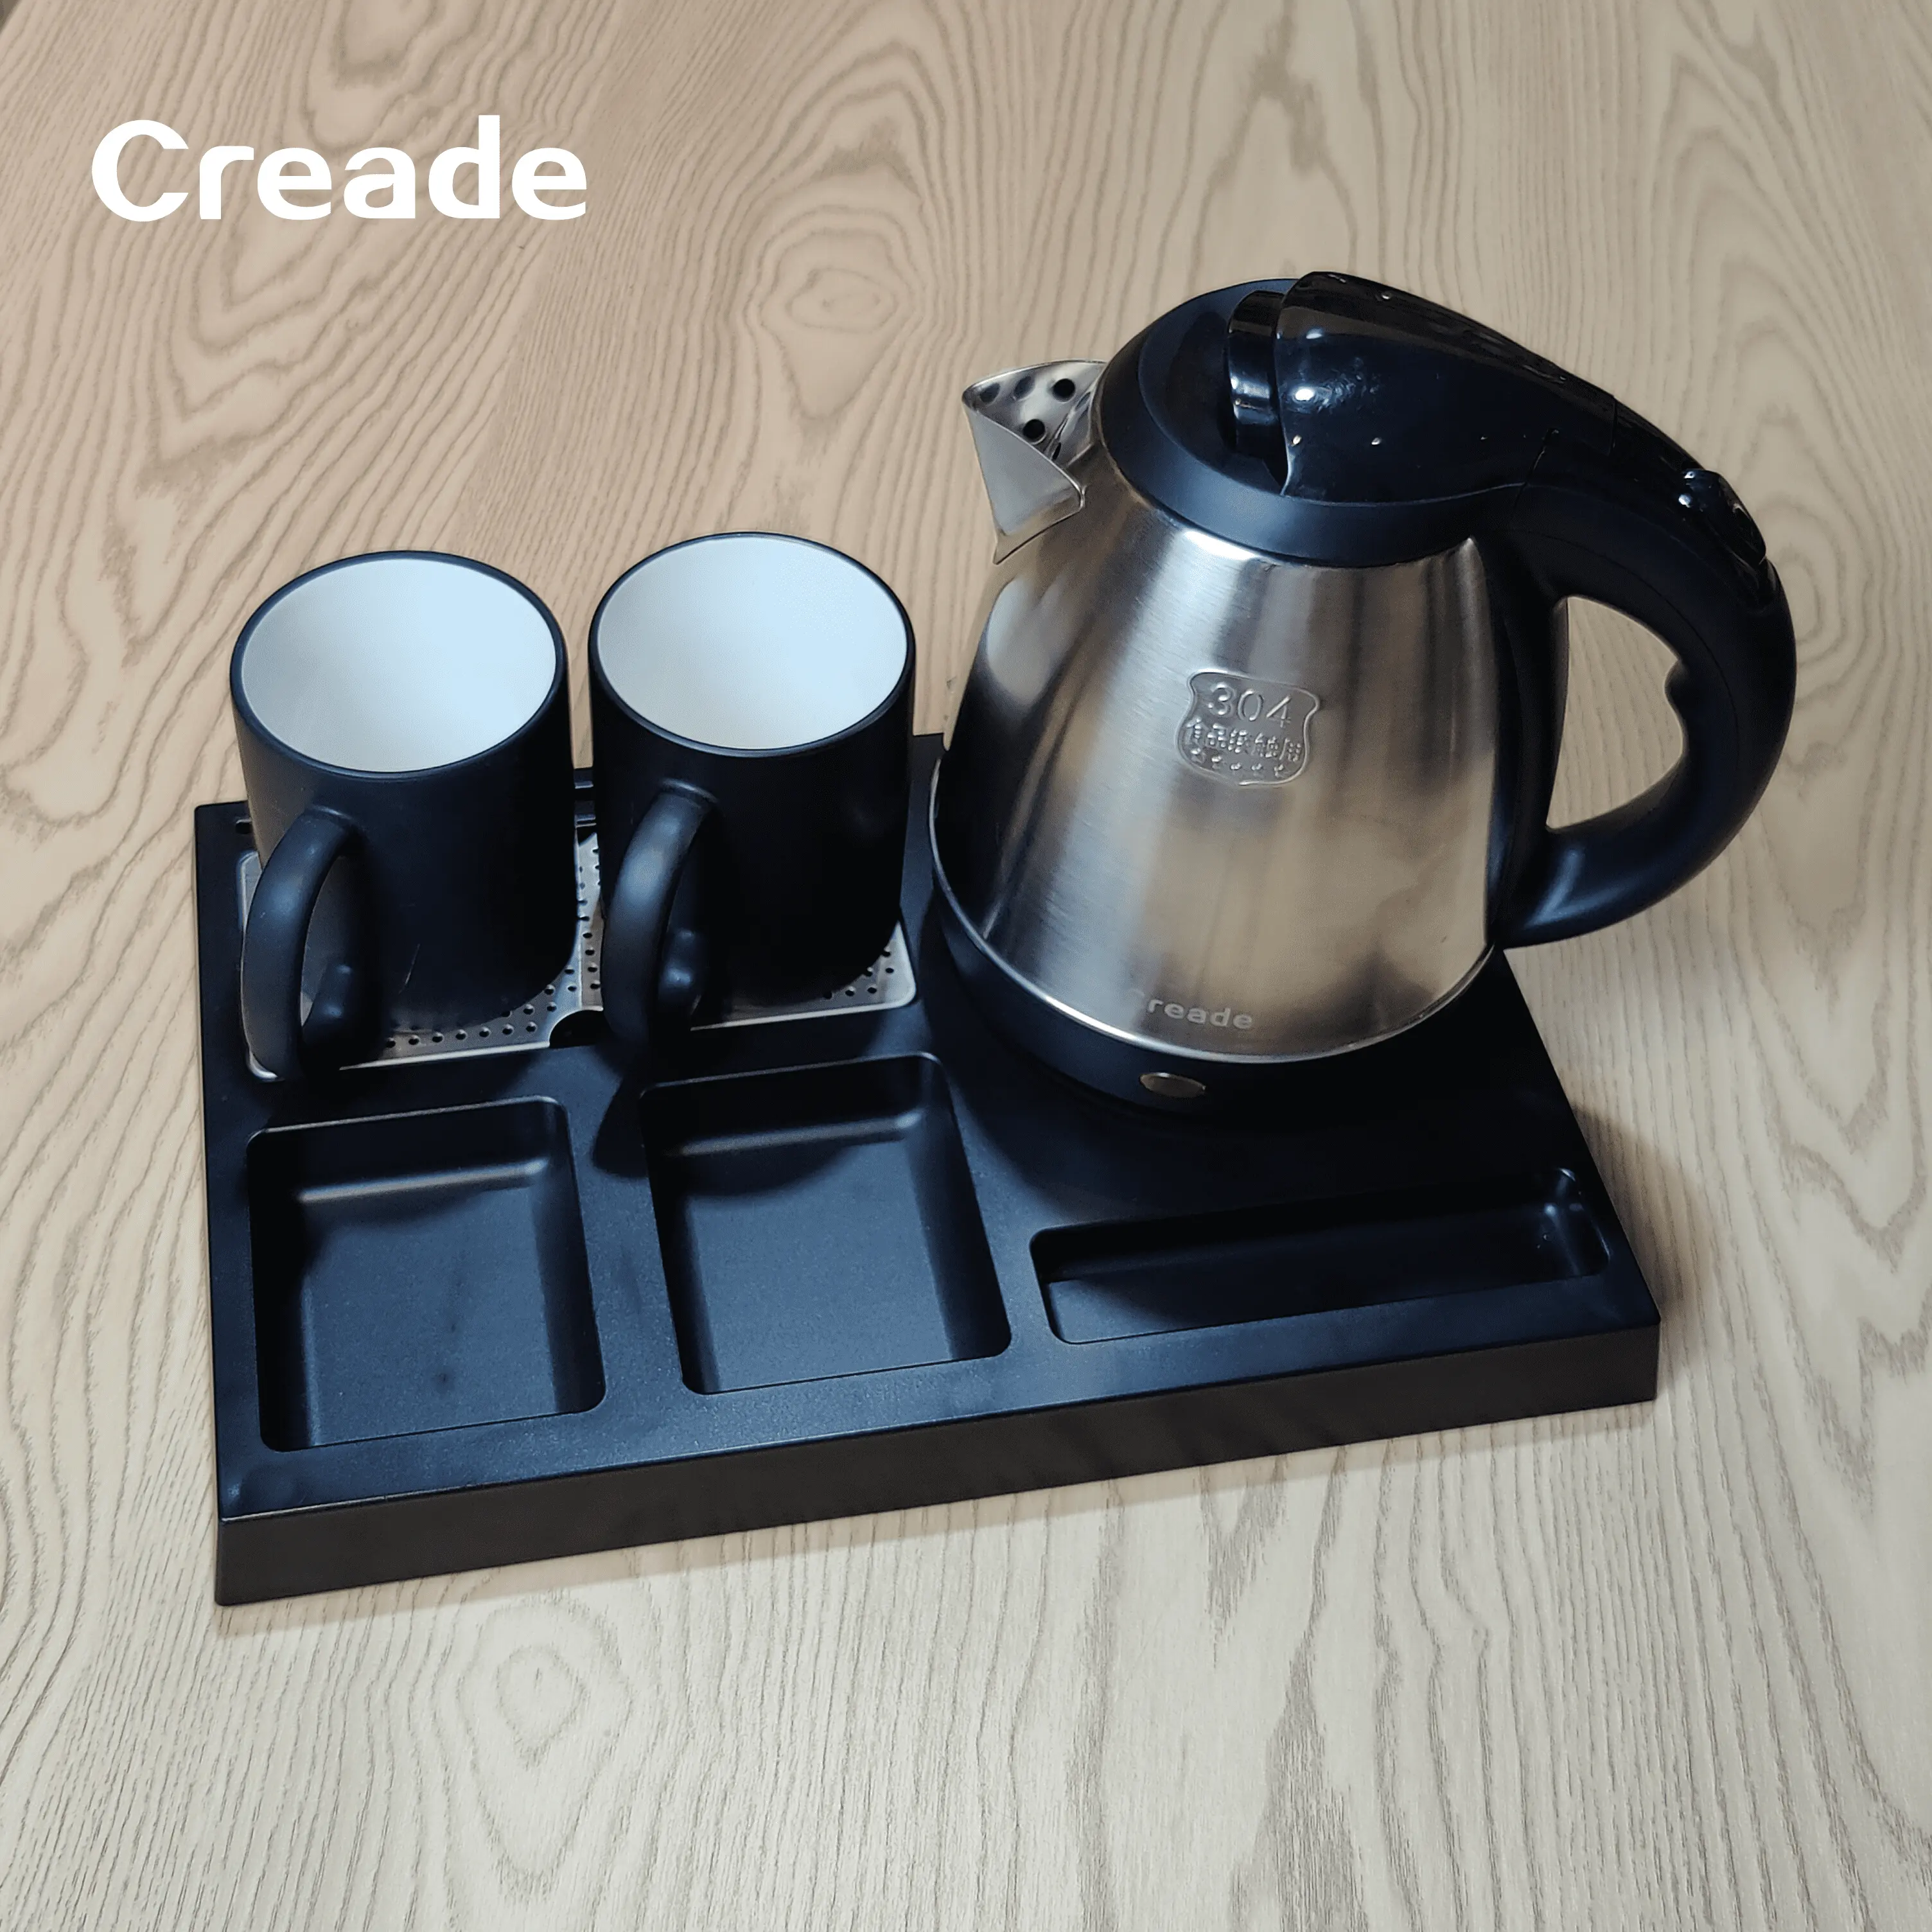 Creade Hotel Appliances High Quality 1.2l Stainless Steel Electric Kettle With Tray Set For Hotel